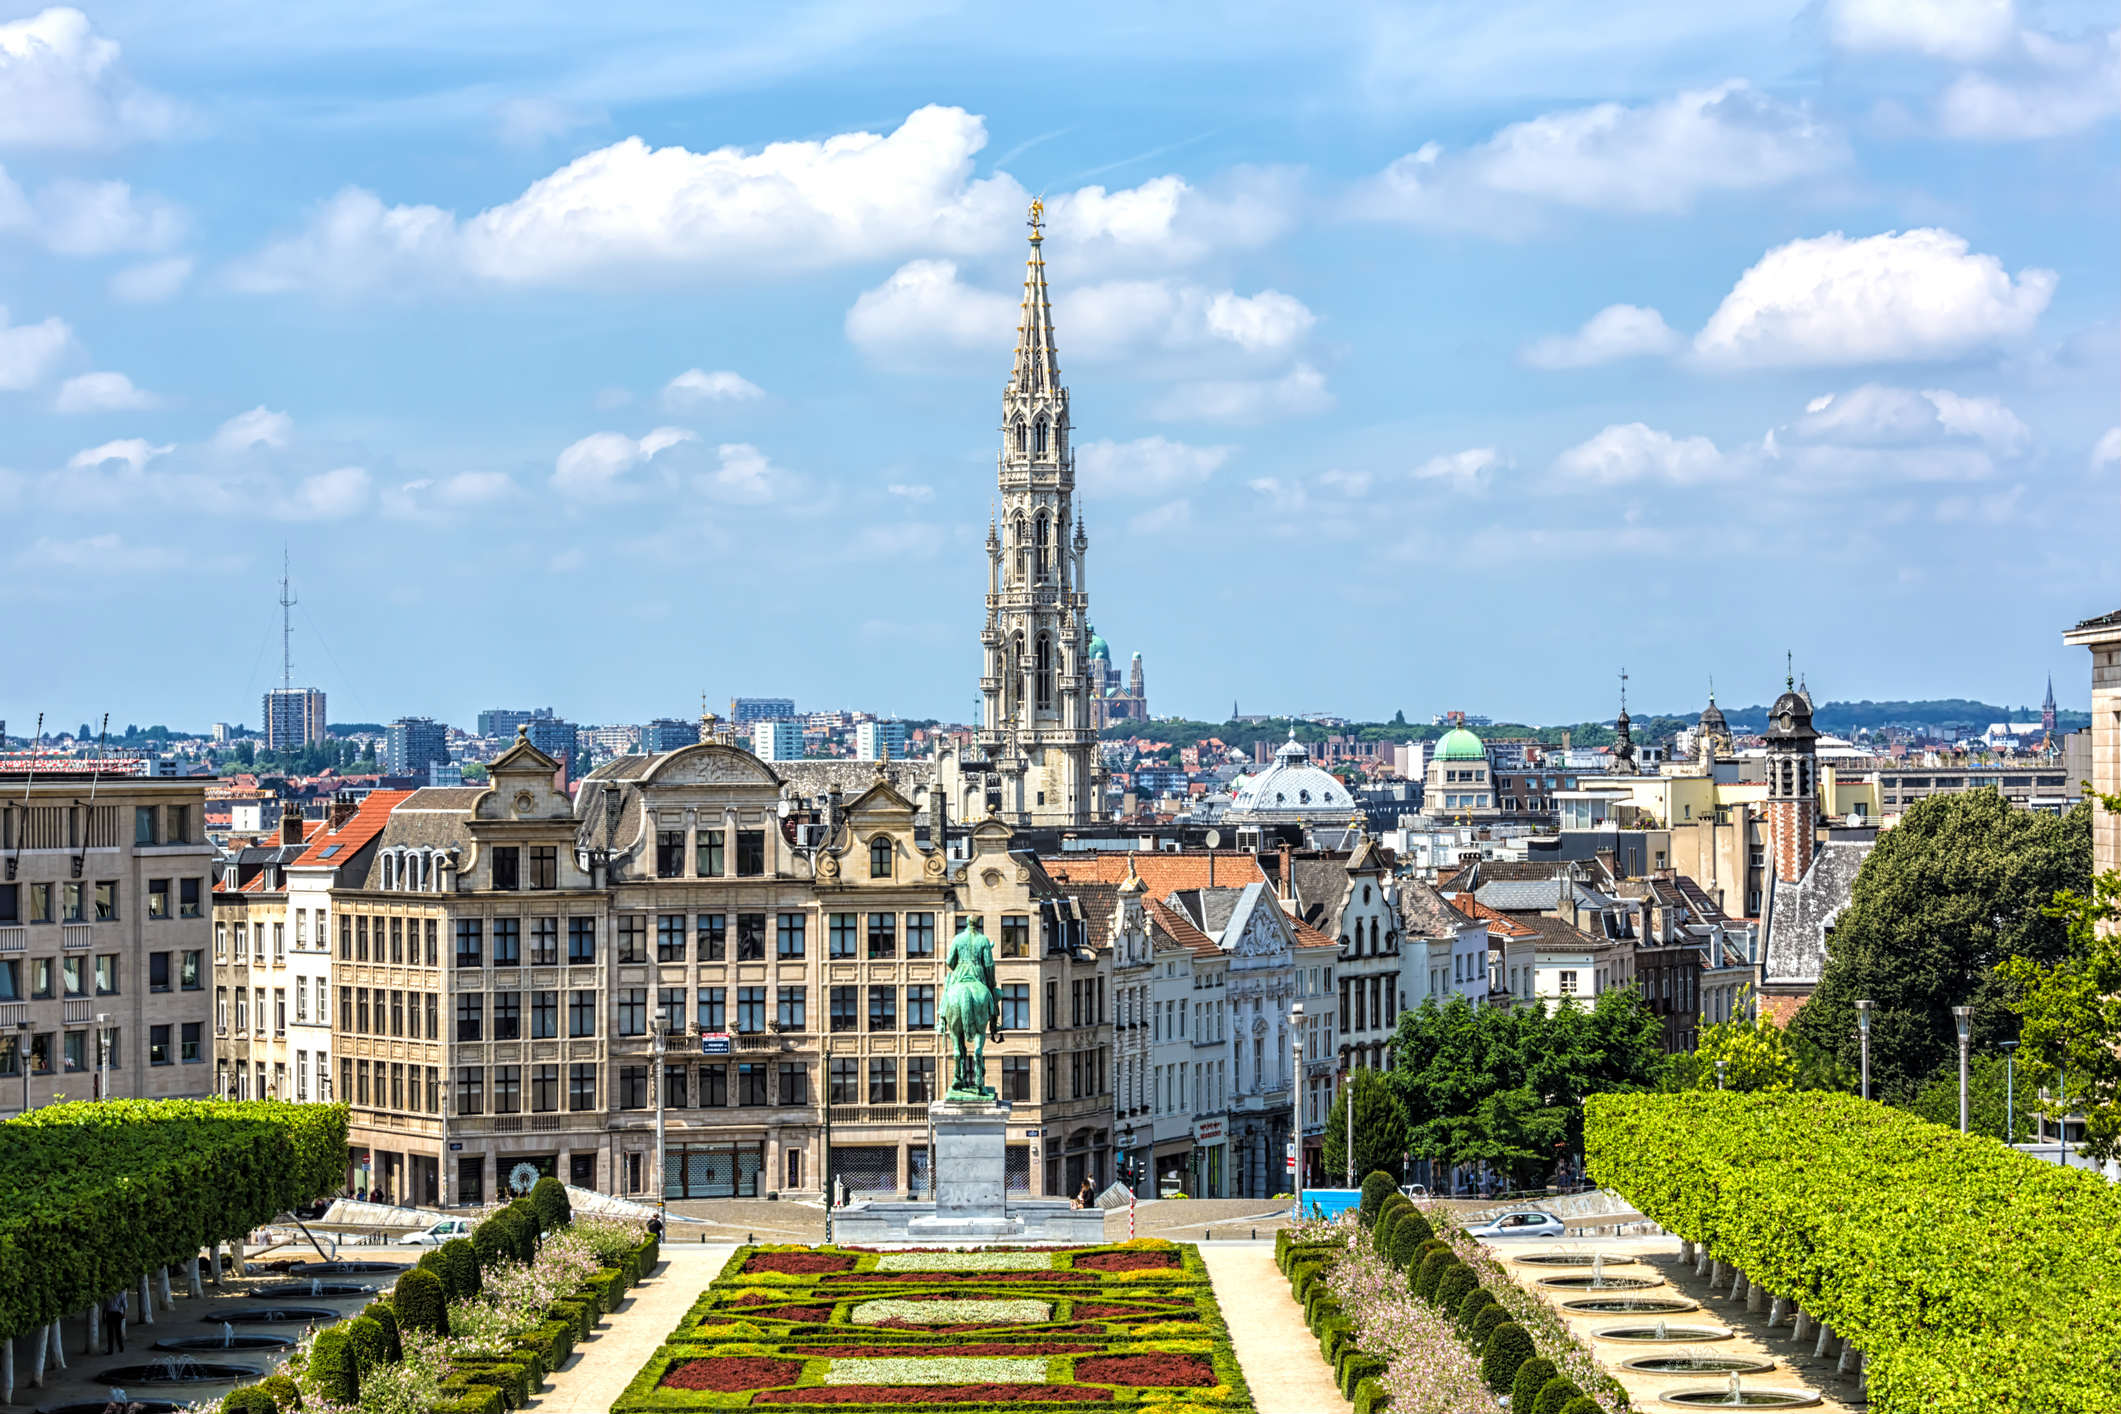 A peaceful view of Brussels